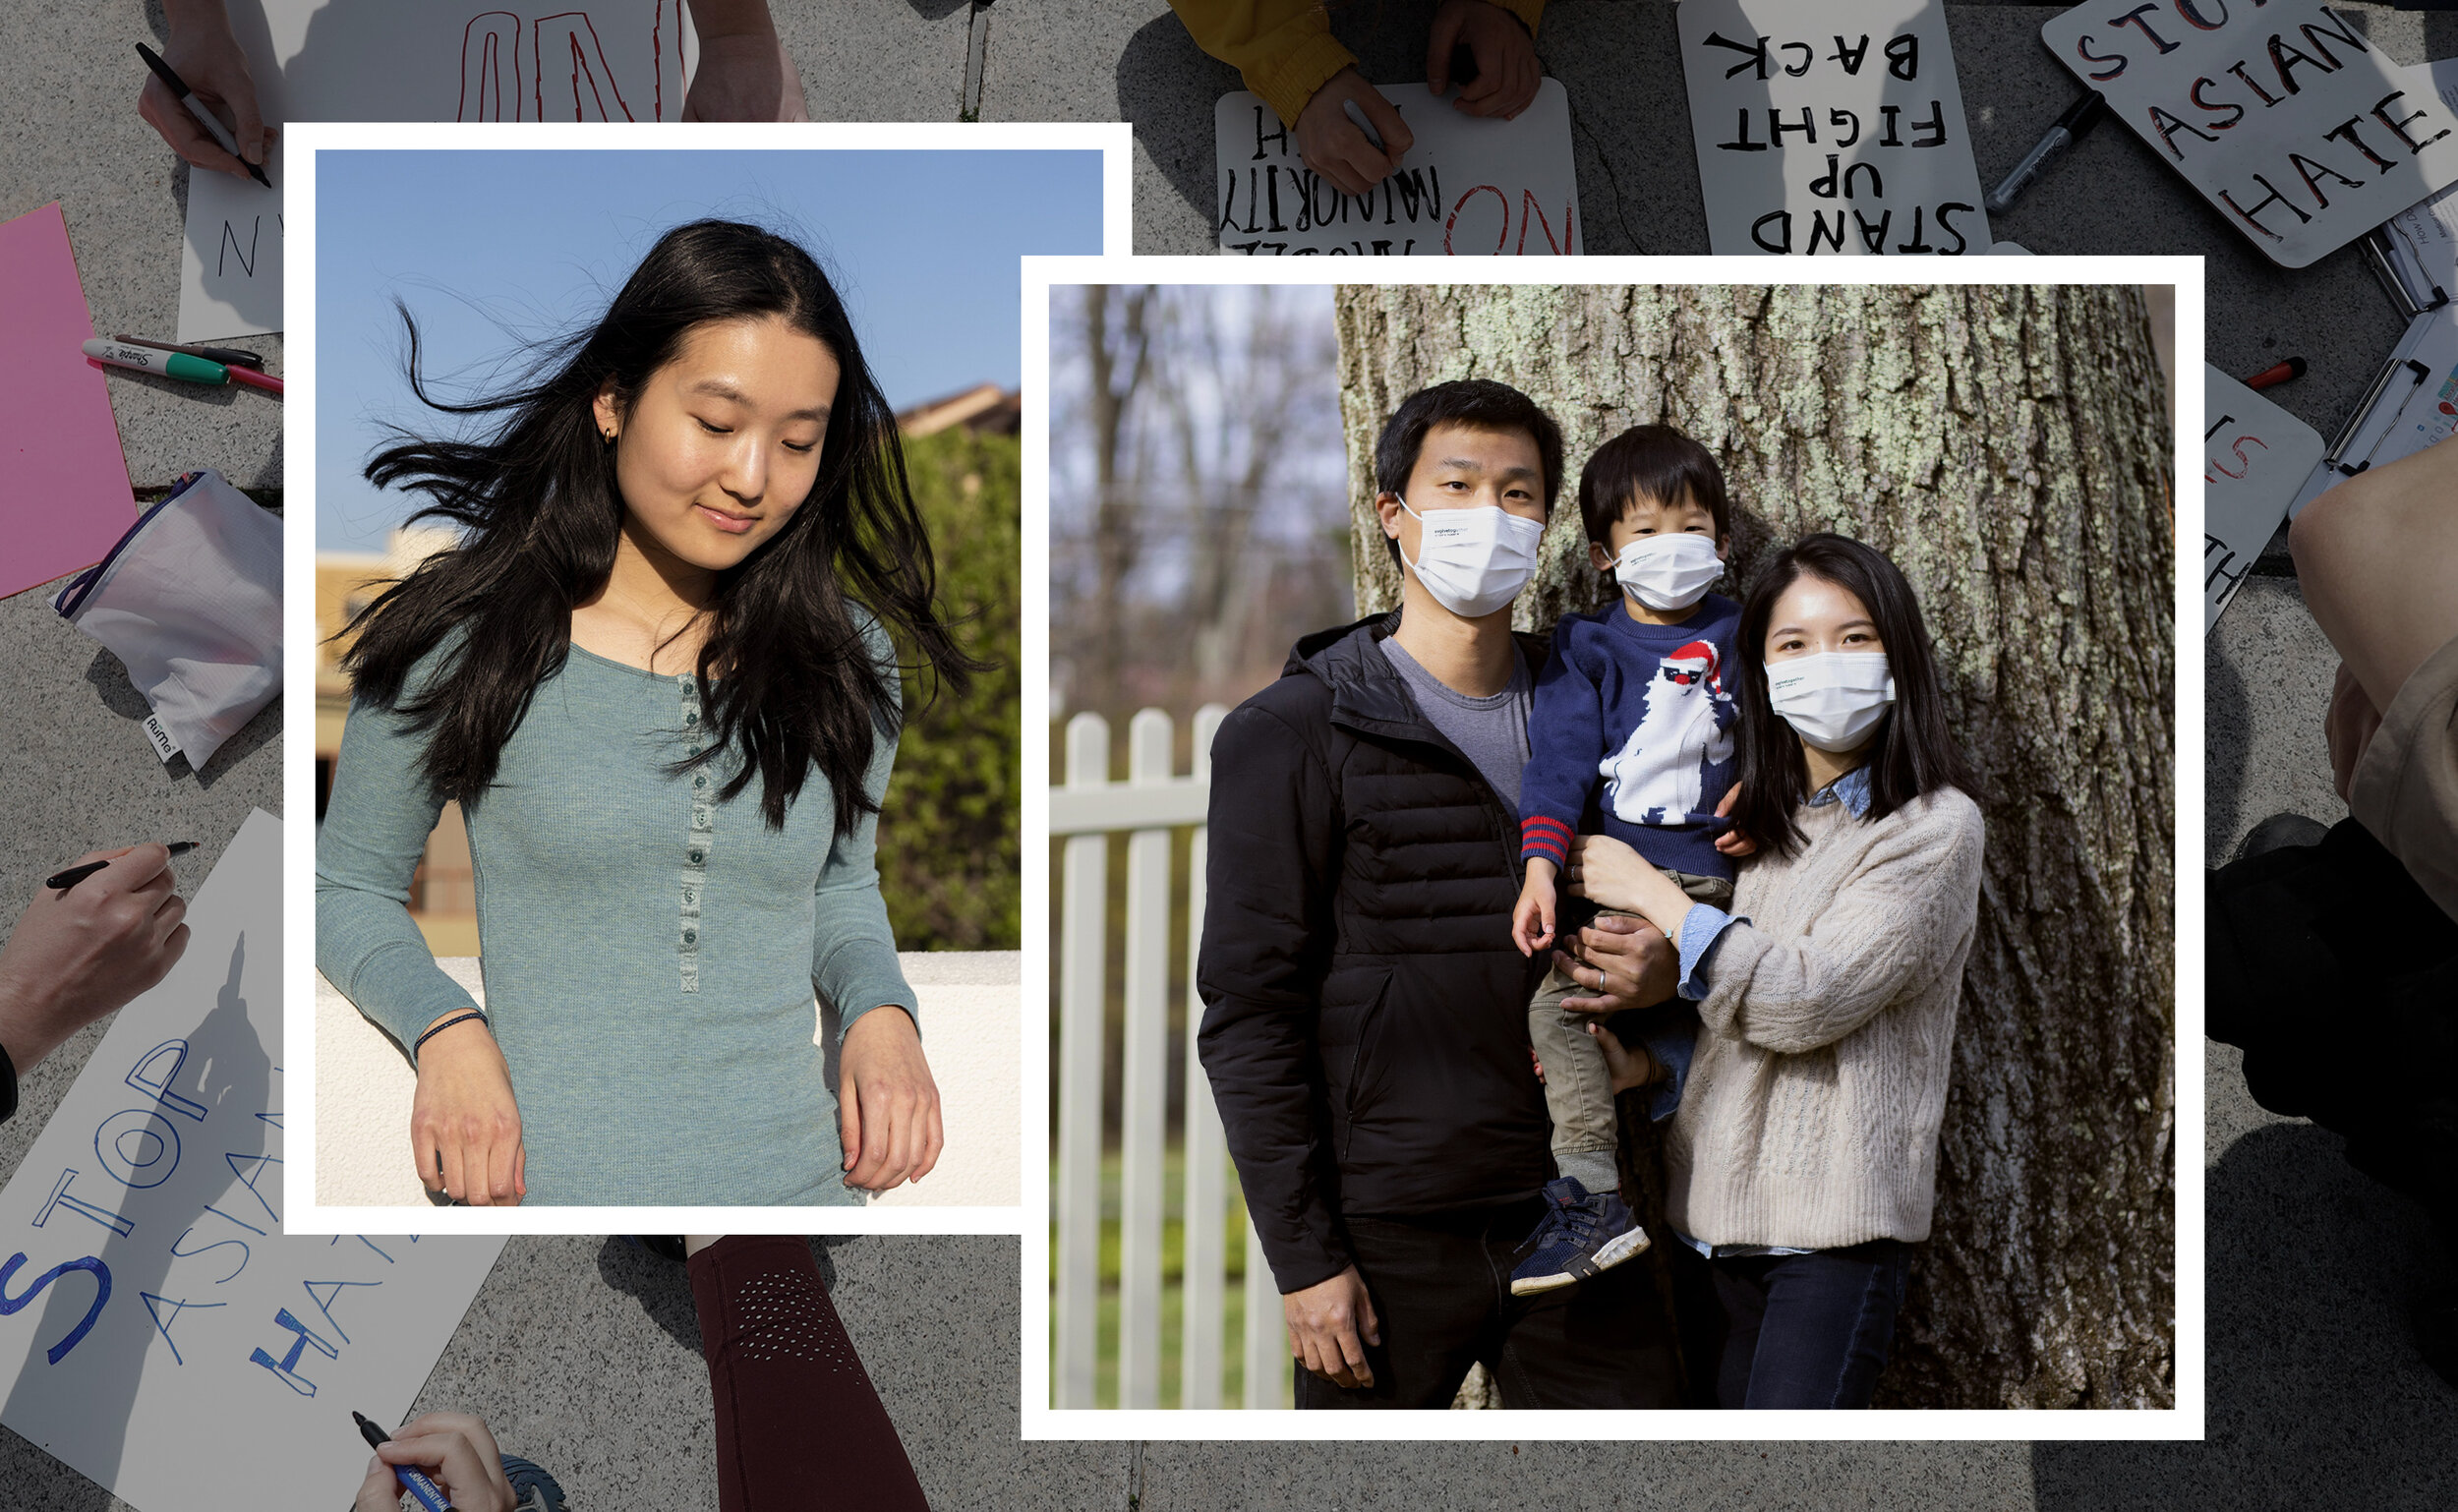  Photography:  Jessica Chou  +  Erica Seryhm Lee   Photo Editing + Design: Ariel Zambelich + Stephen Reiss  Story:  Violence Spurs Many Asian-Americans to Activism for First Time   